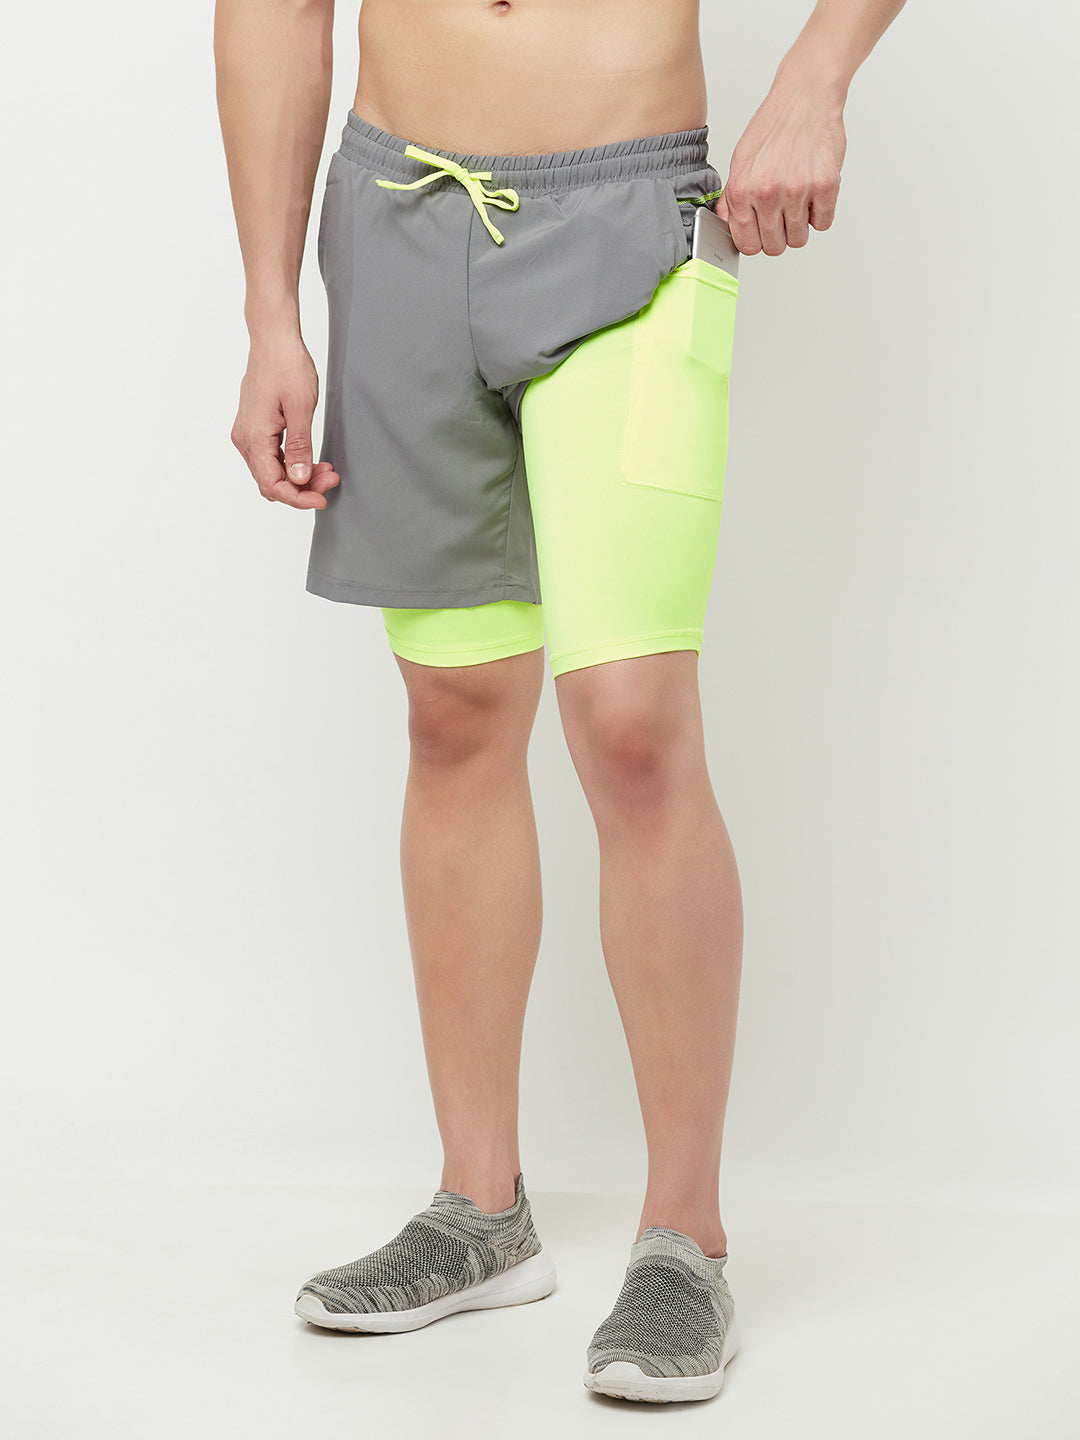 Men's Running Shorts with Phone Pocket